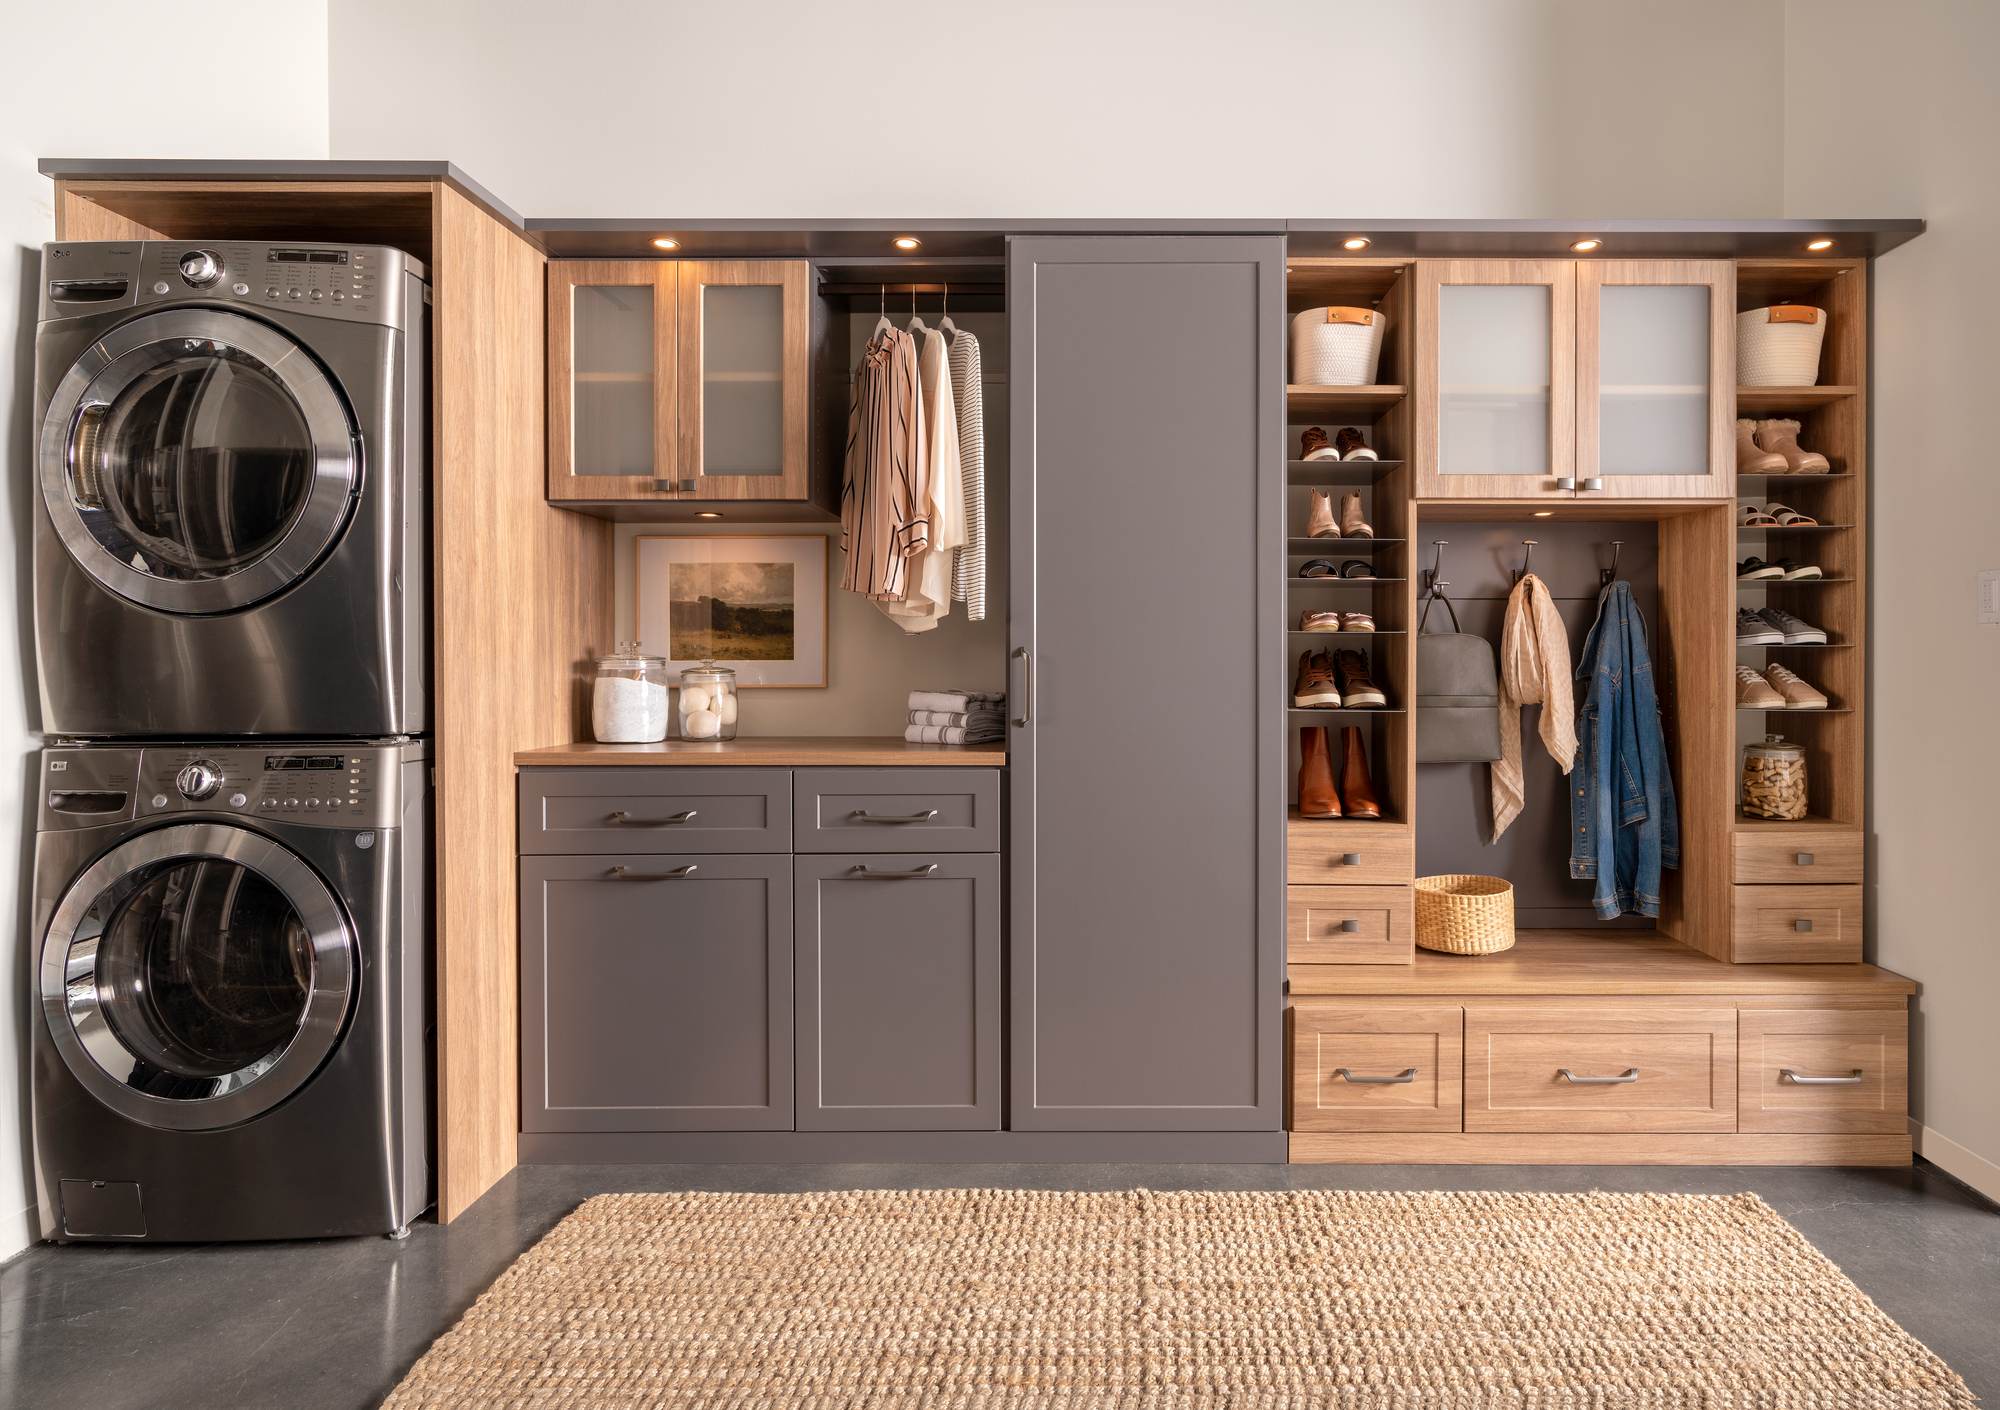 Laundry room and mudroom shared space with shoe storage from Inspired Closets